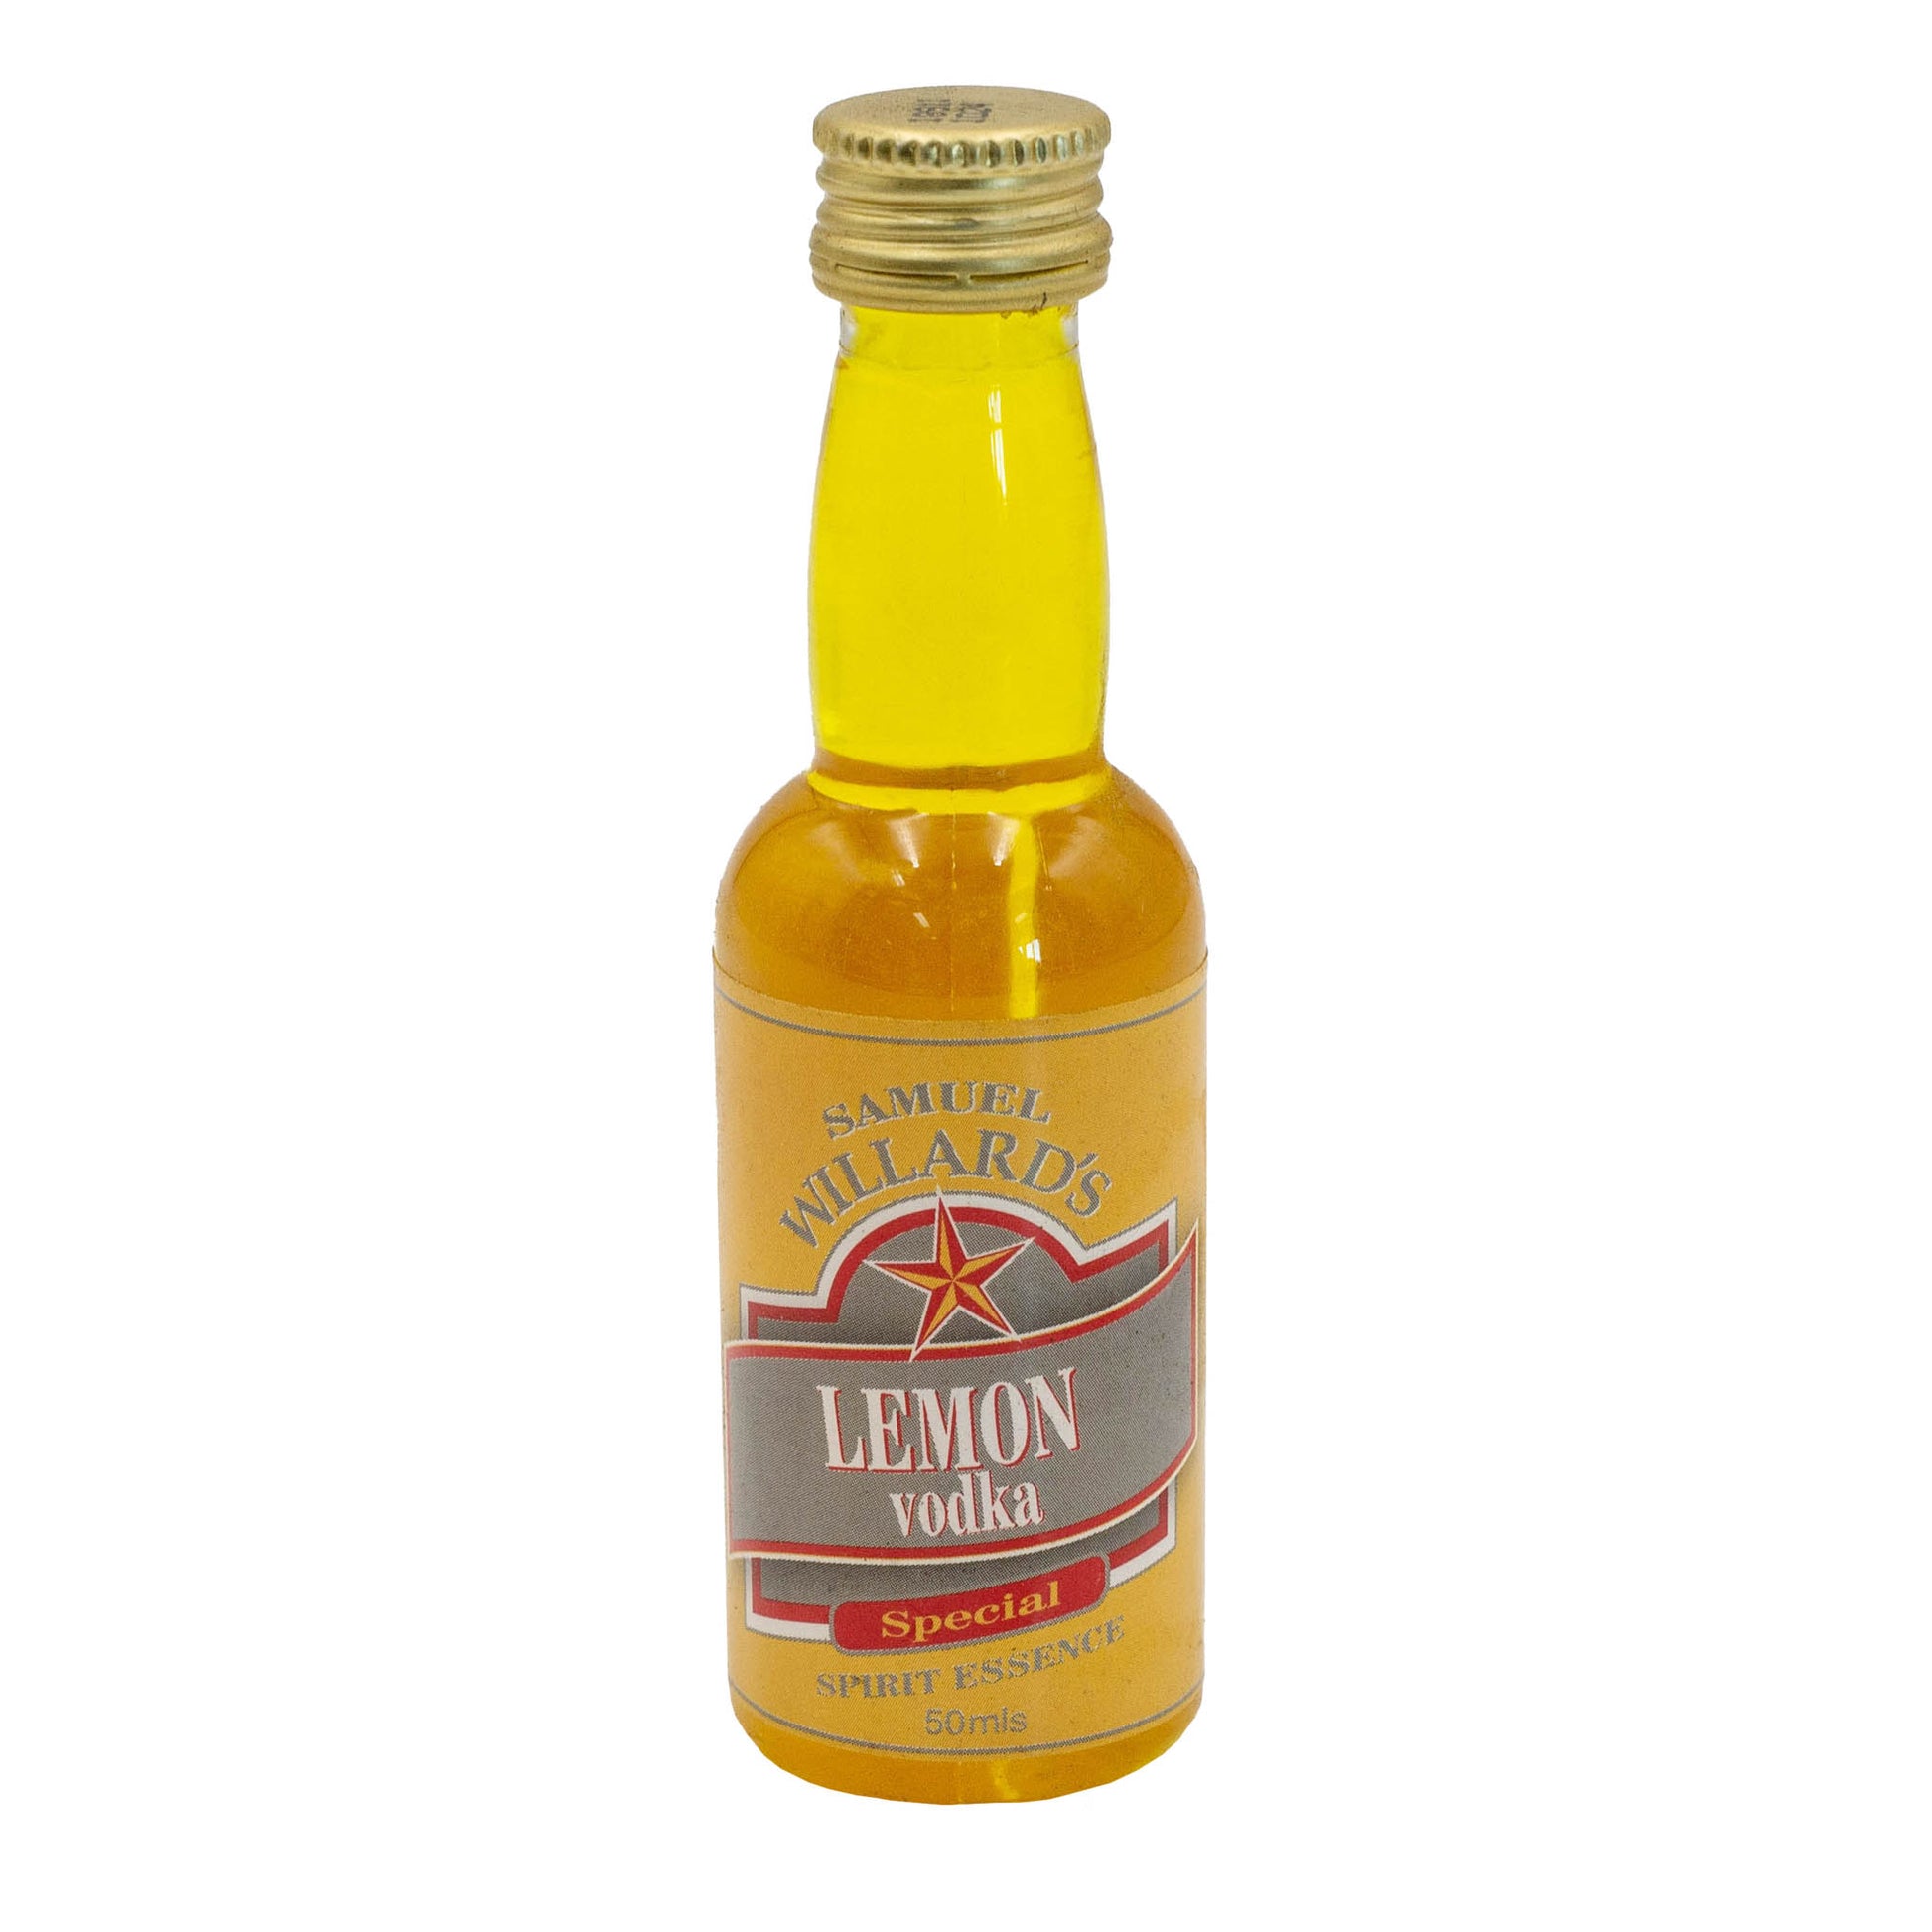 Samuel Willards Lemon Vodka essence makes a Absolute Vodka Citrus style drink. Will make 1125ml of finished product from each 50ml bottle